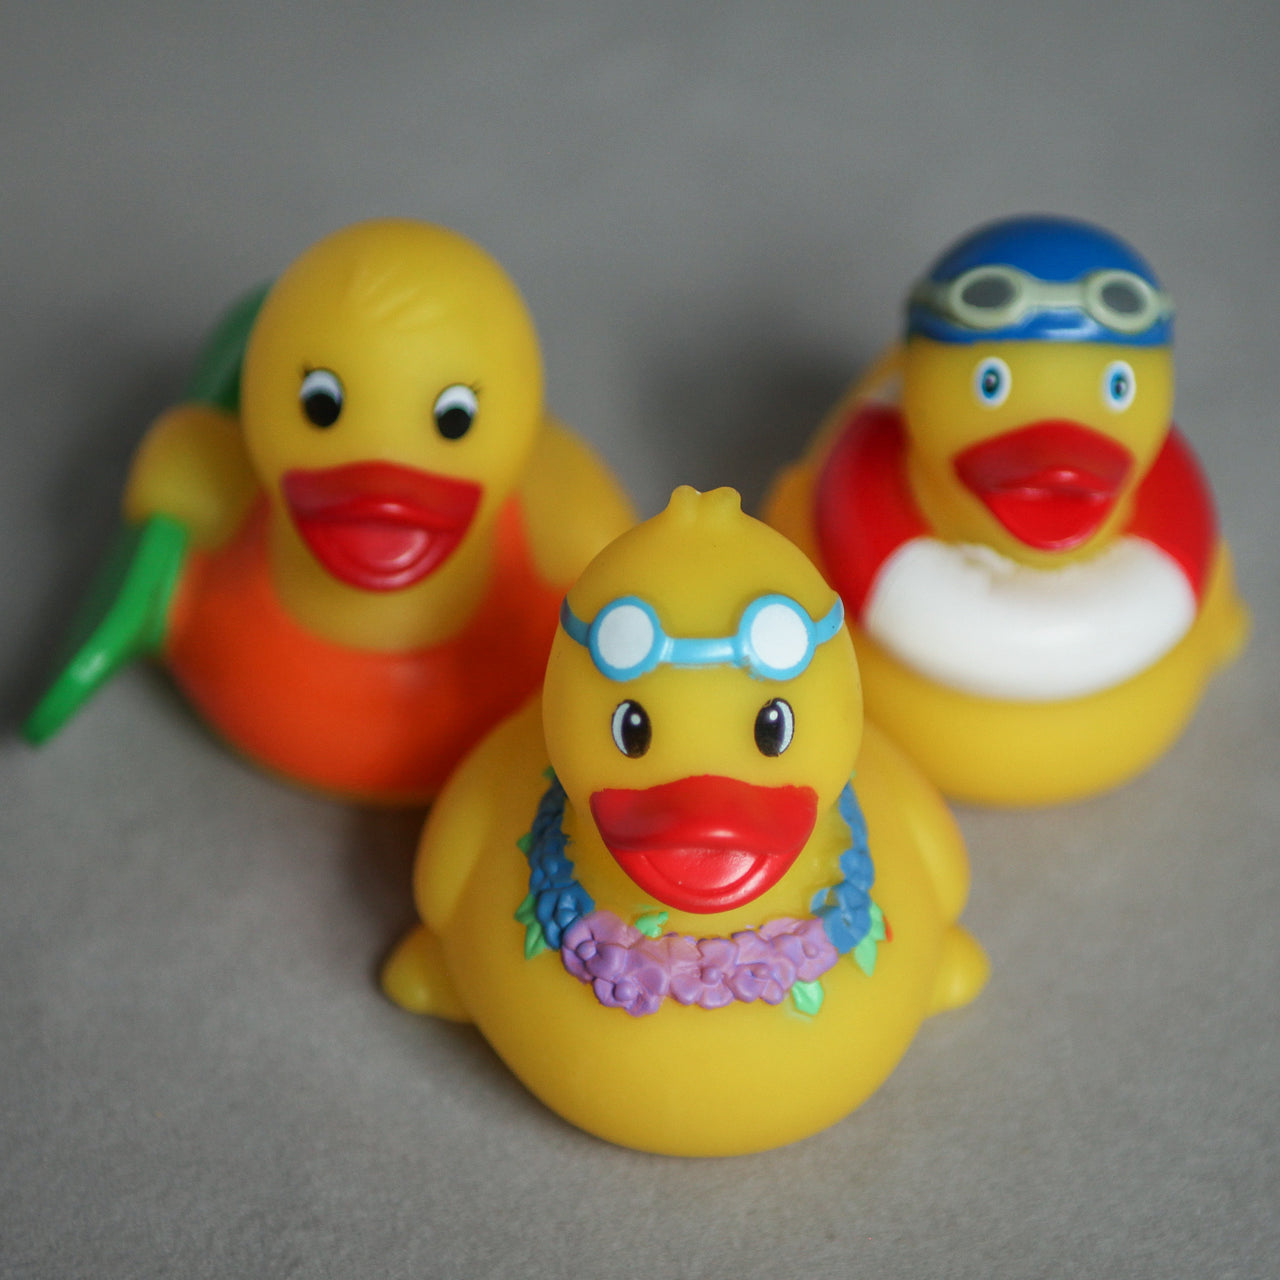 Rubber Ducky Yellow Classic Bath Toy